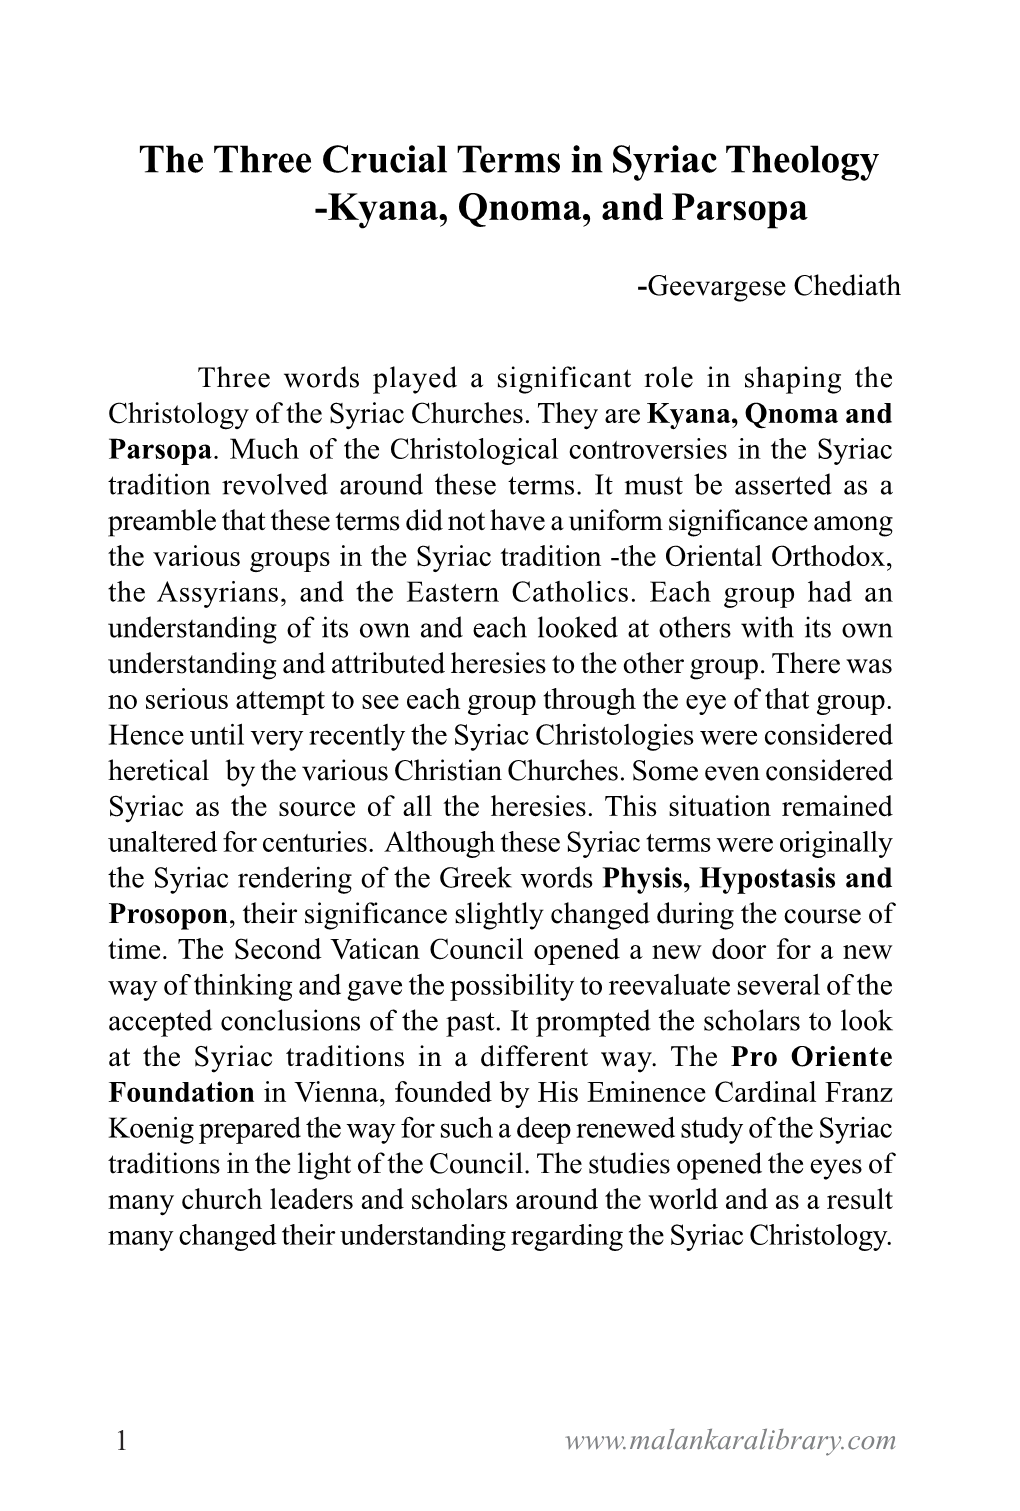 The Three Crucial Terms in Syriac Theology -Kyana, Qnoma, and Parsopa